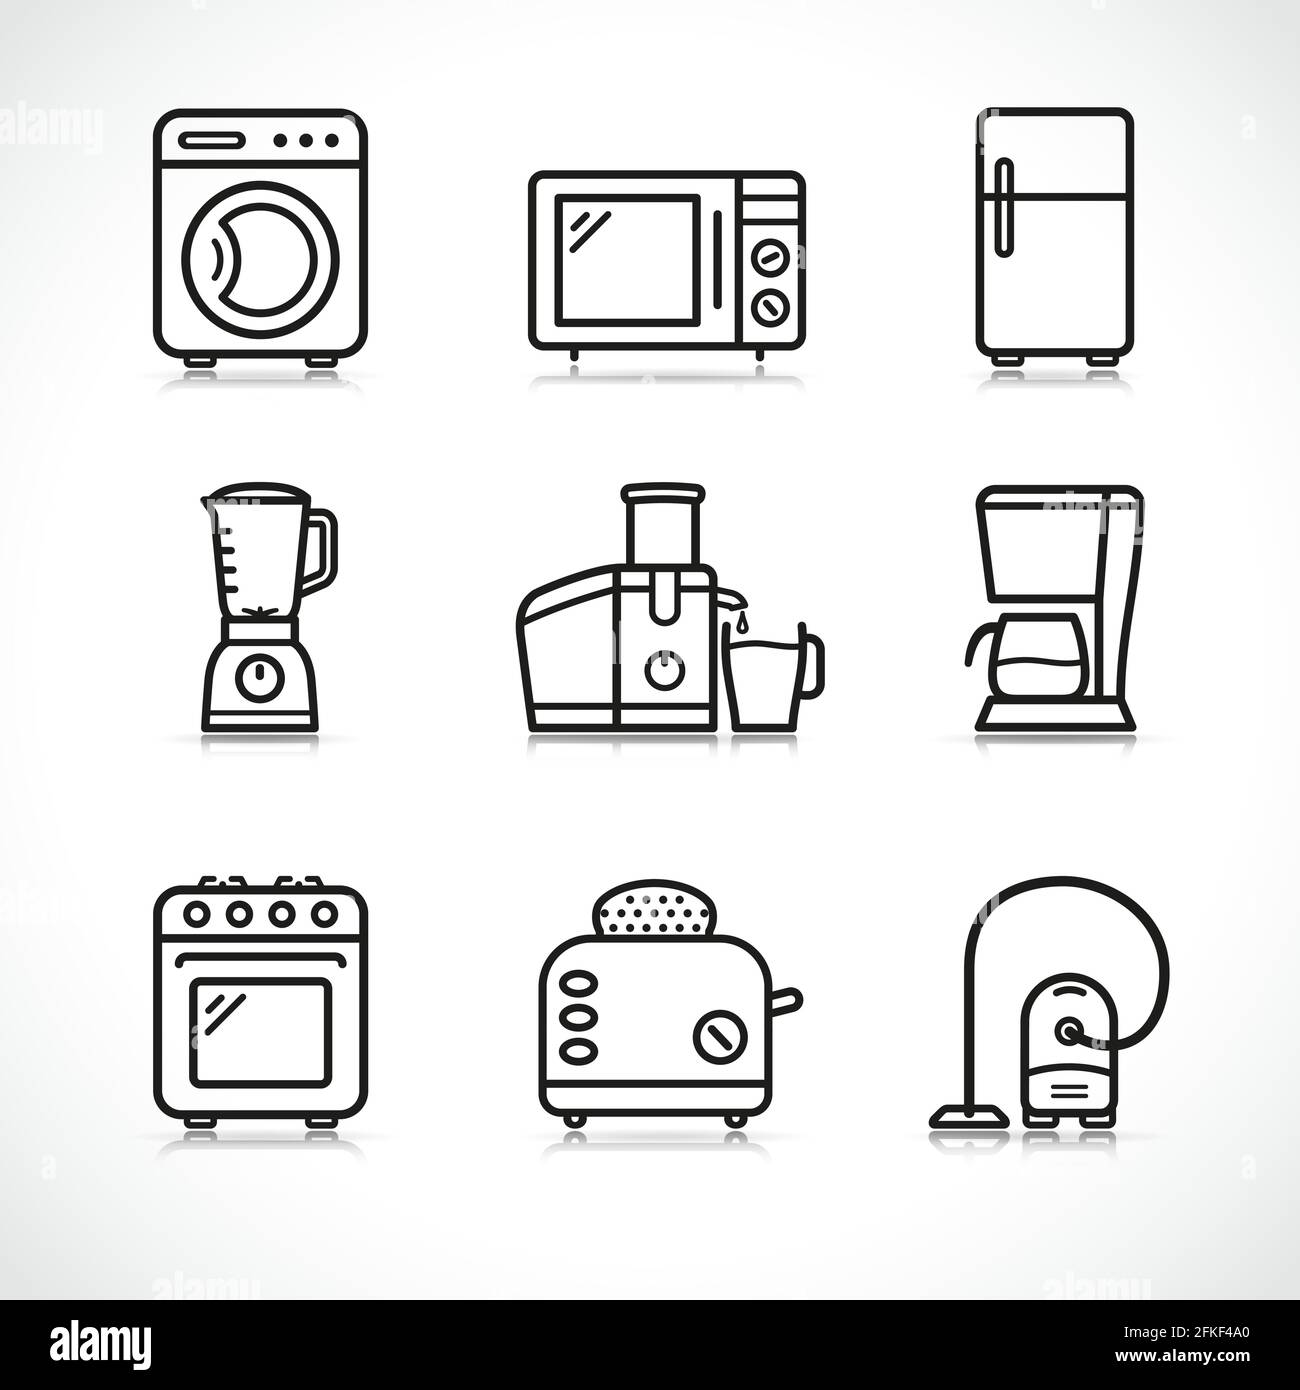 Vector illustration of home appliance icons set Stock Vector